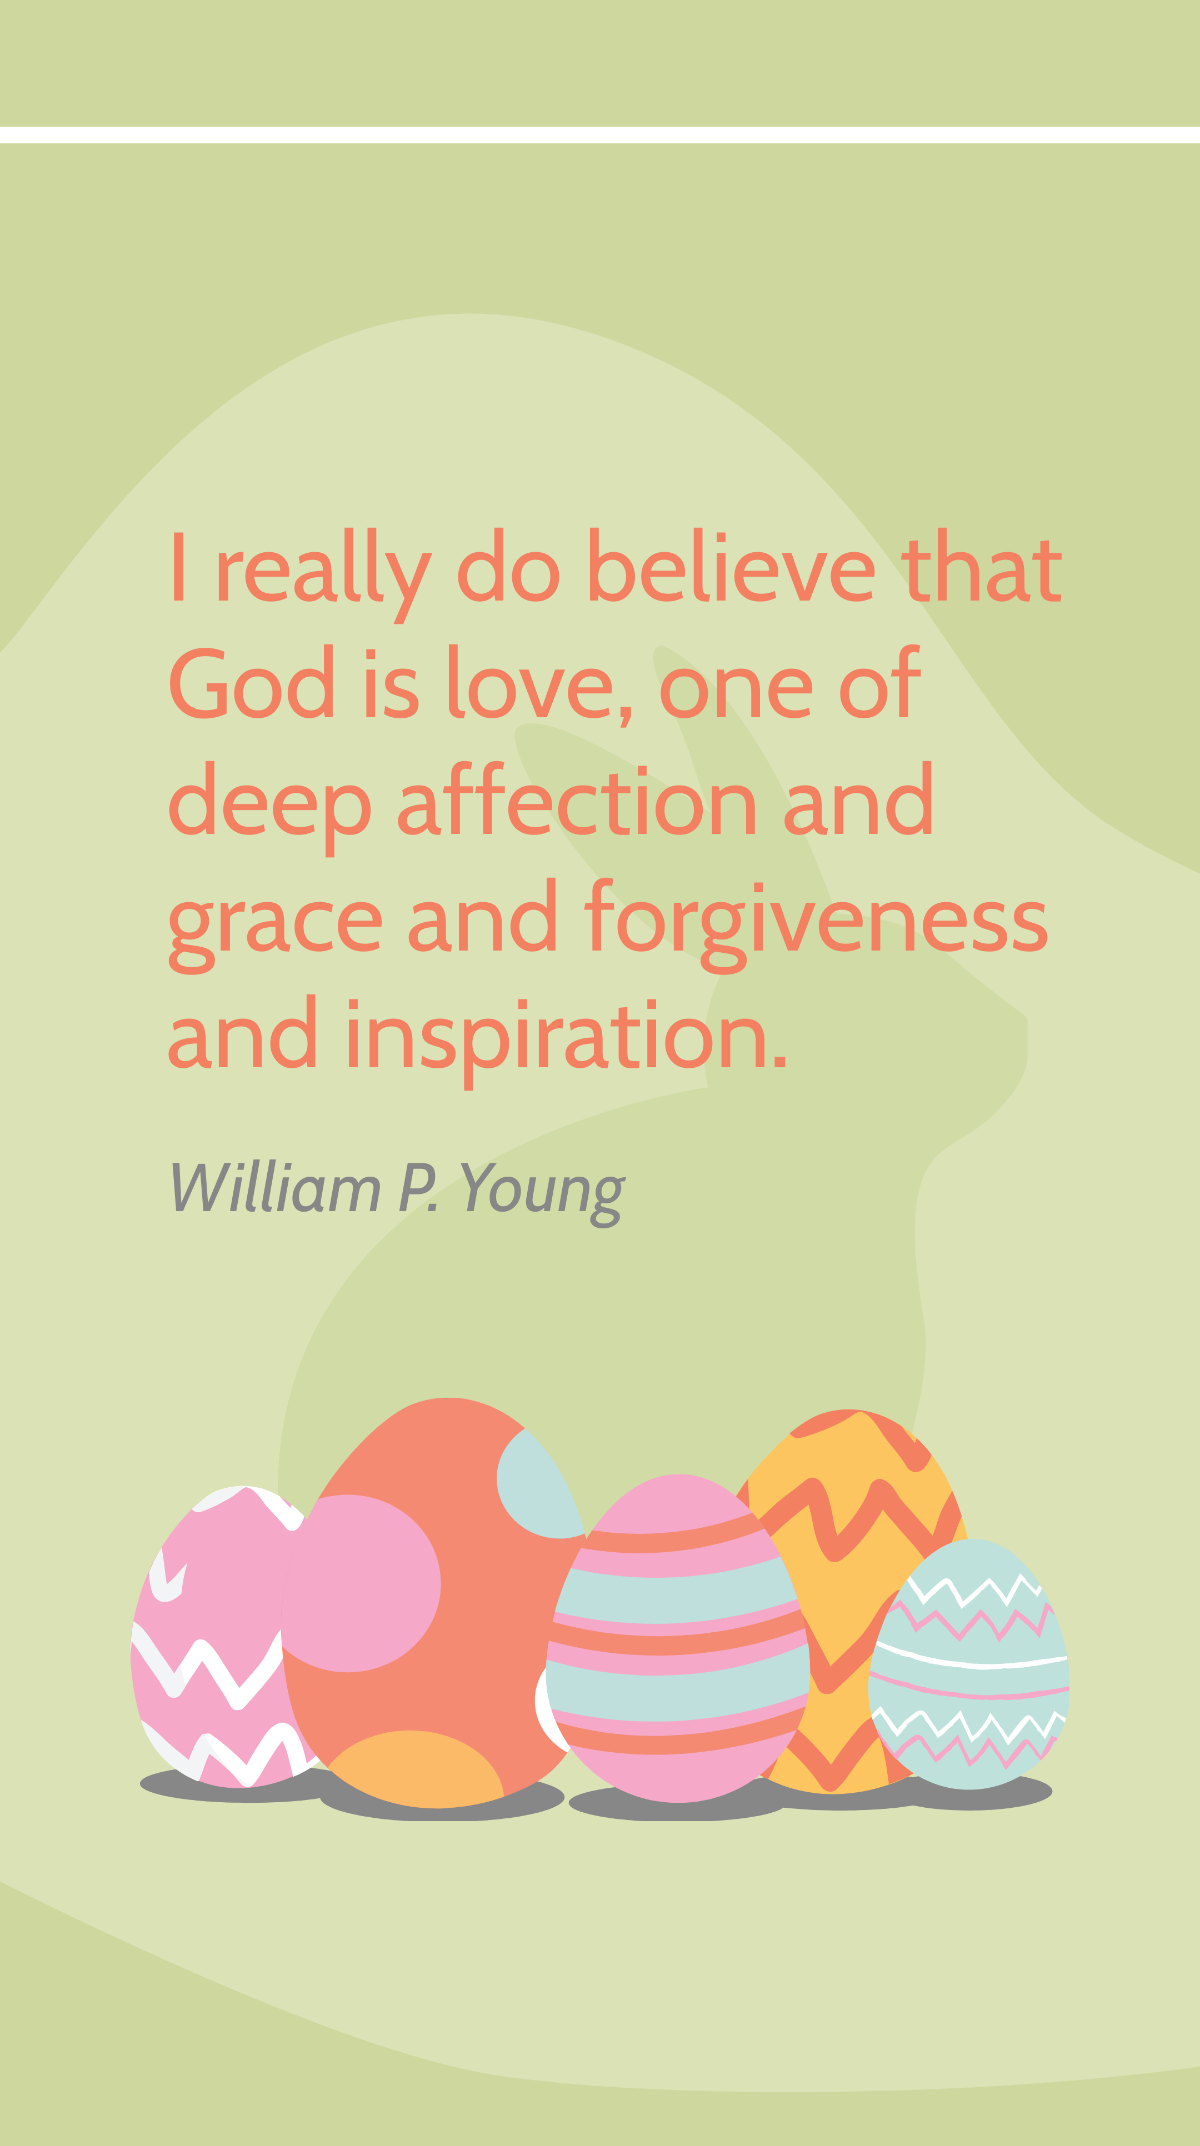 William P. Young - I really do believe that God is love, one of deep affection and grace and forgiveness and inspiration. Template